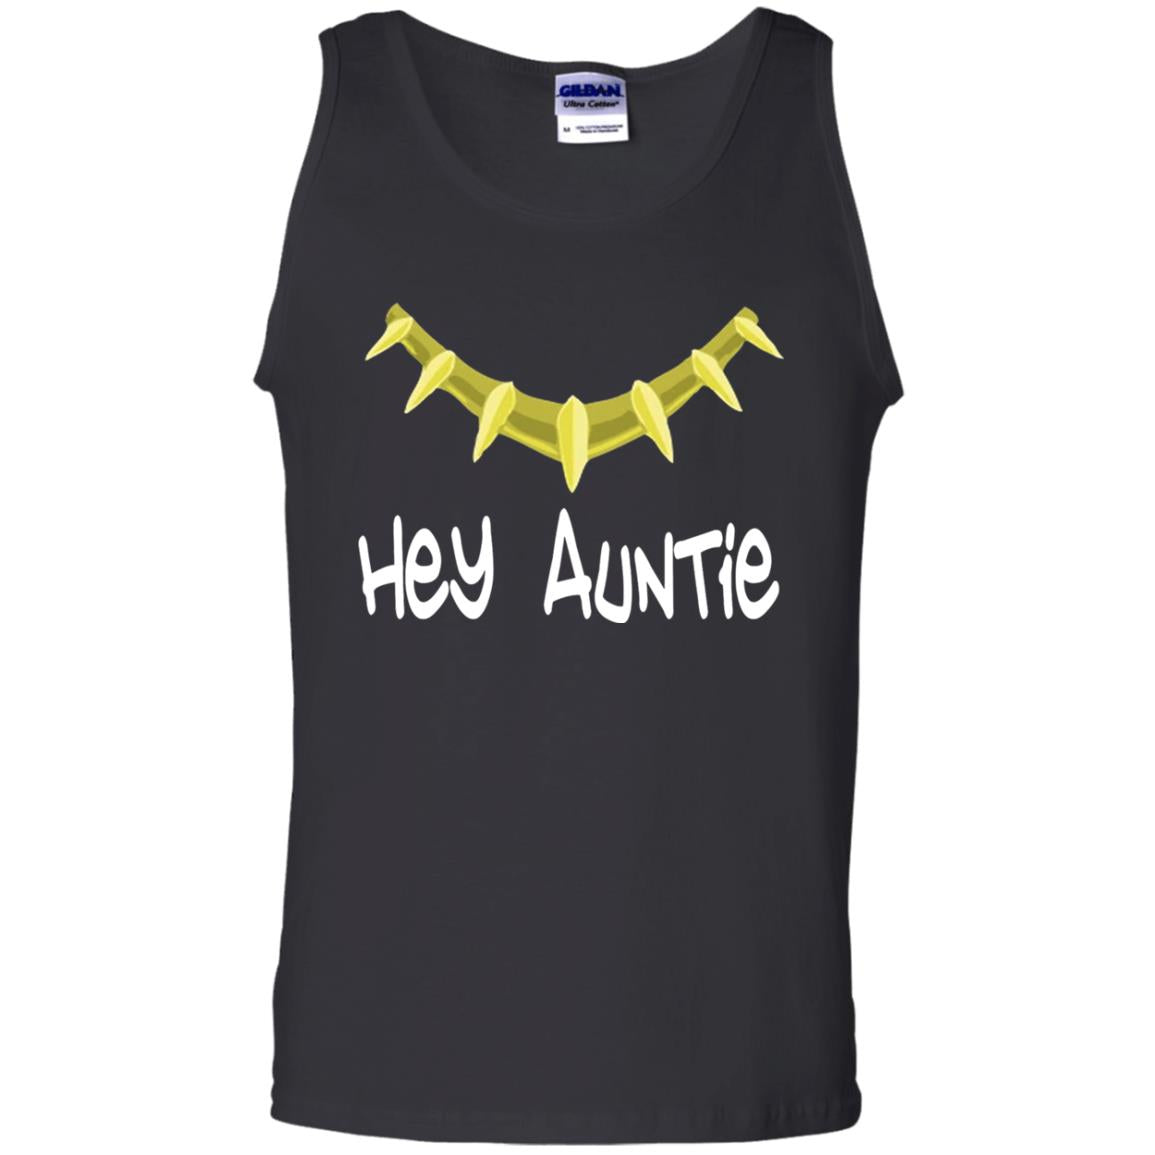 Hey Auntie Funny Aunt T-shirt